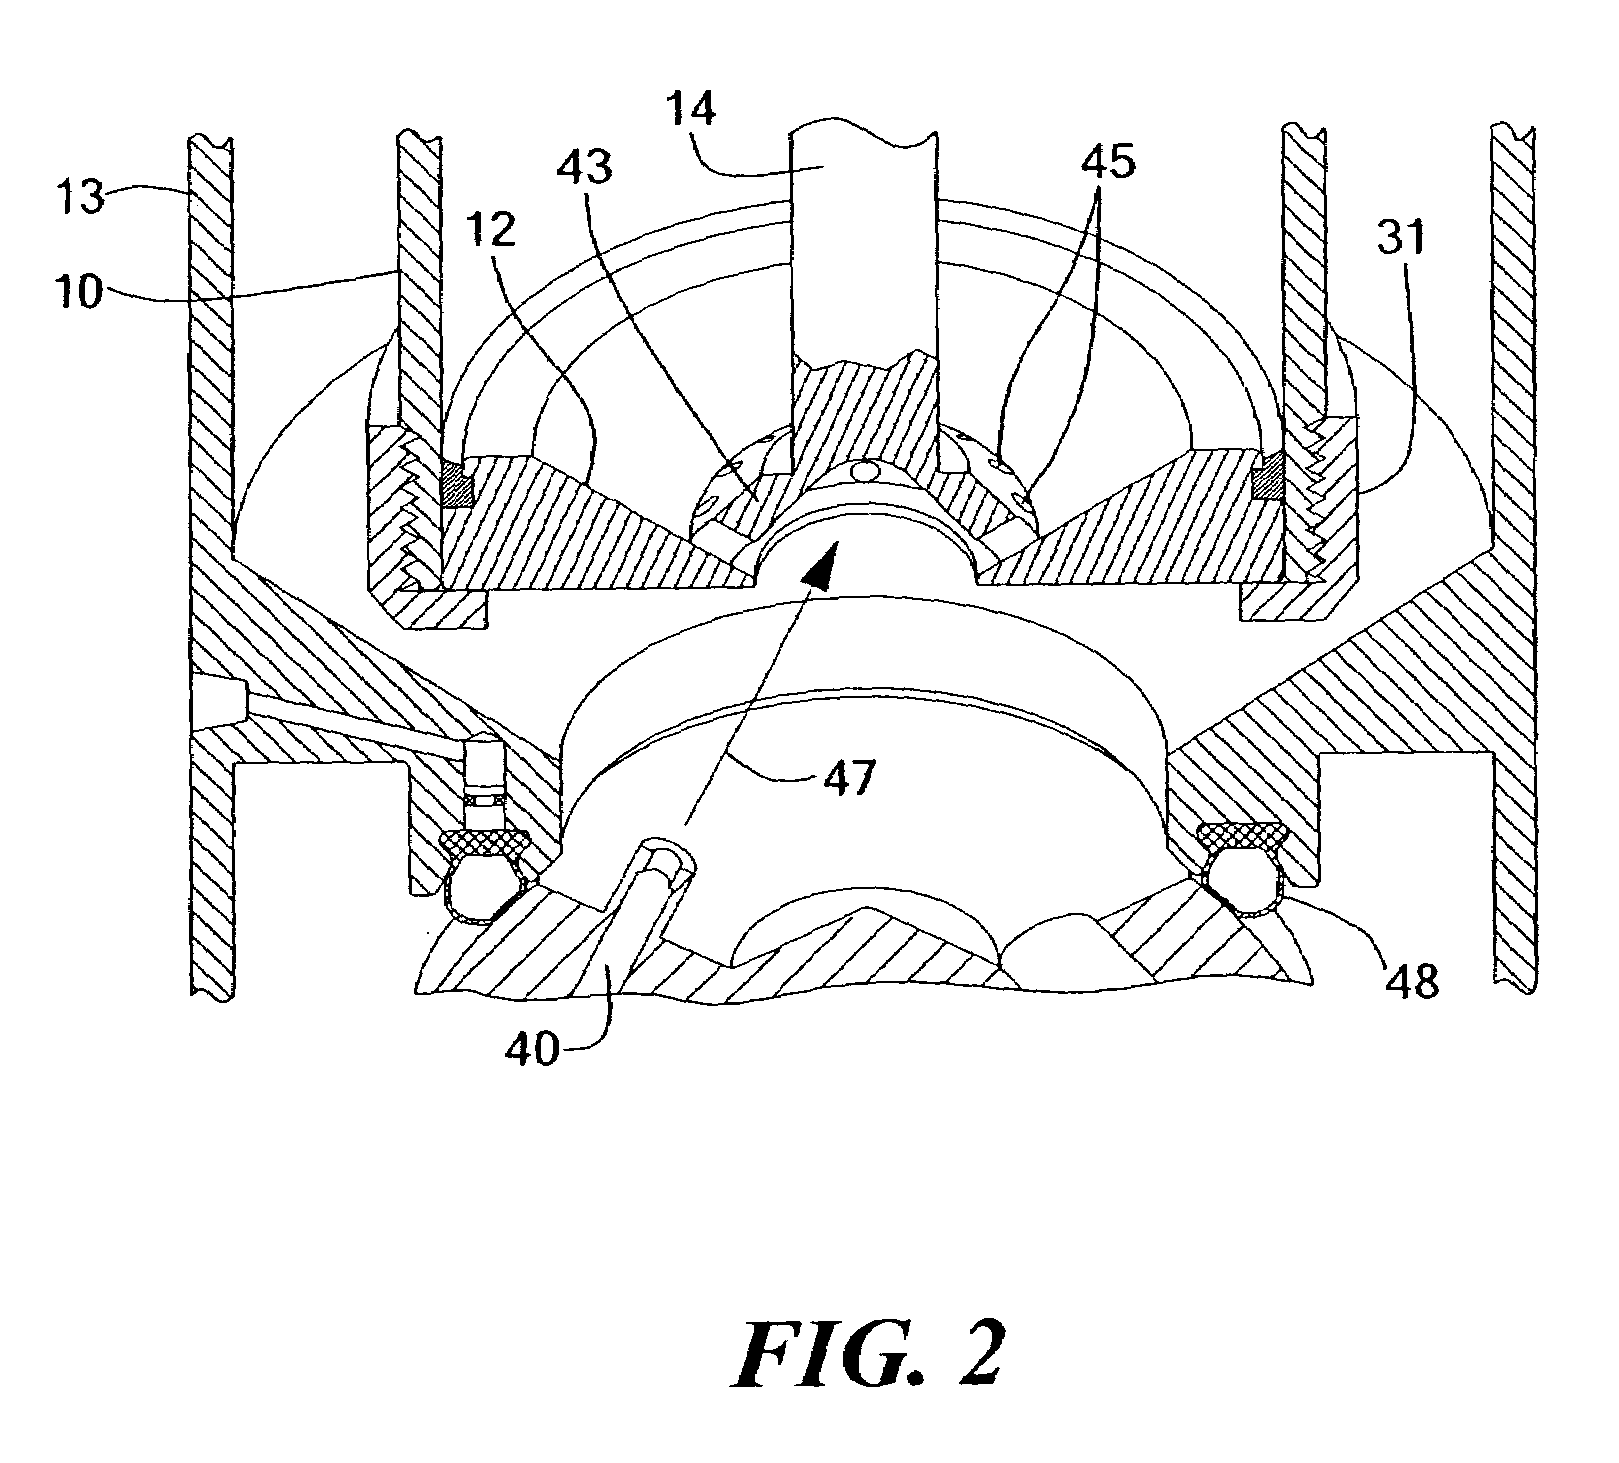 Centrifugal separator with scraper or piston for discharging solids